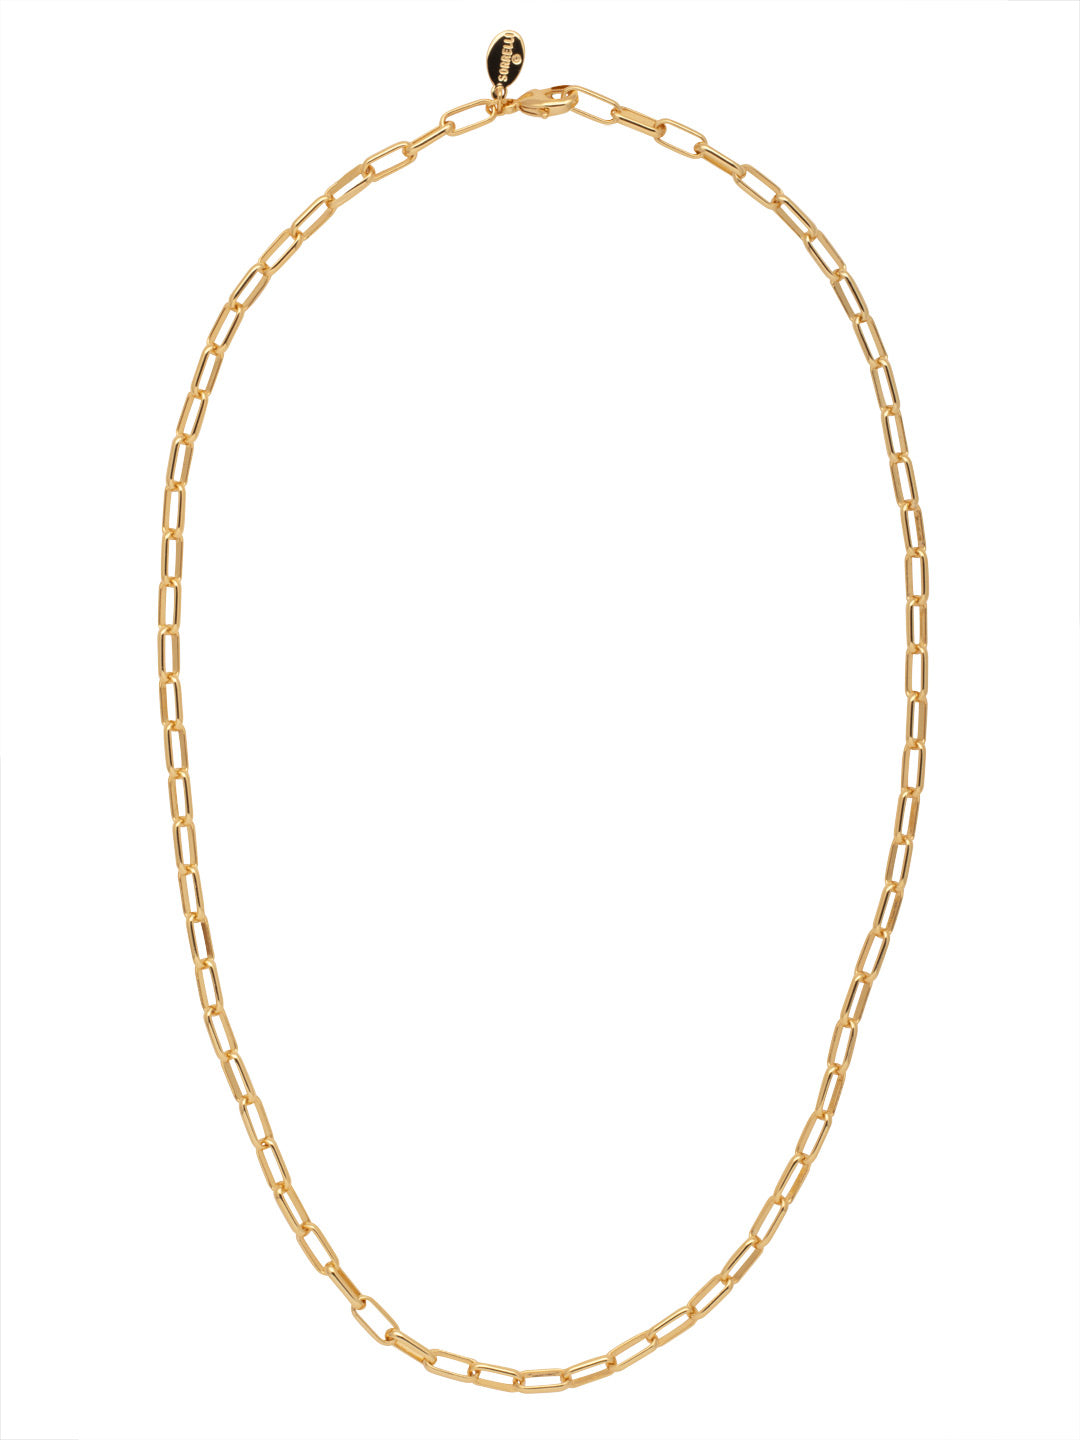 Rachel Tennis Necklace - 4NFC12BGMTL - <p>The Rachel Tennis Necklace features a single adjustable rectangle chain, secured with a lobster claw clasp. From Sorrelli's Bare Metallic collection in our Bright Gold-tone finish.</p>